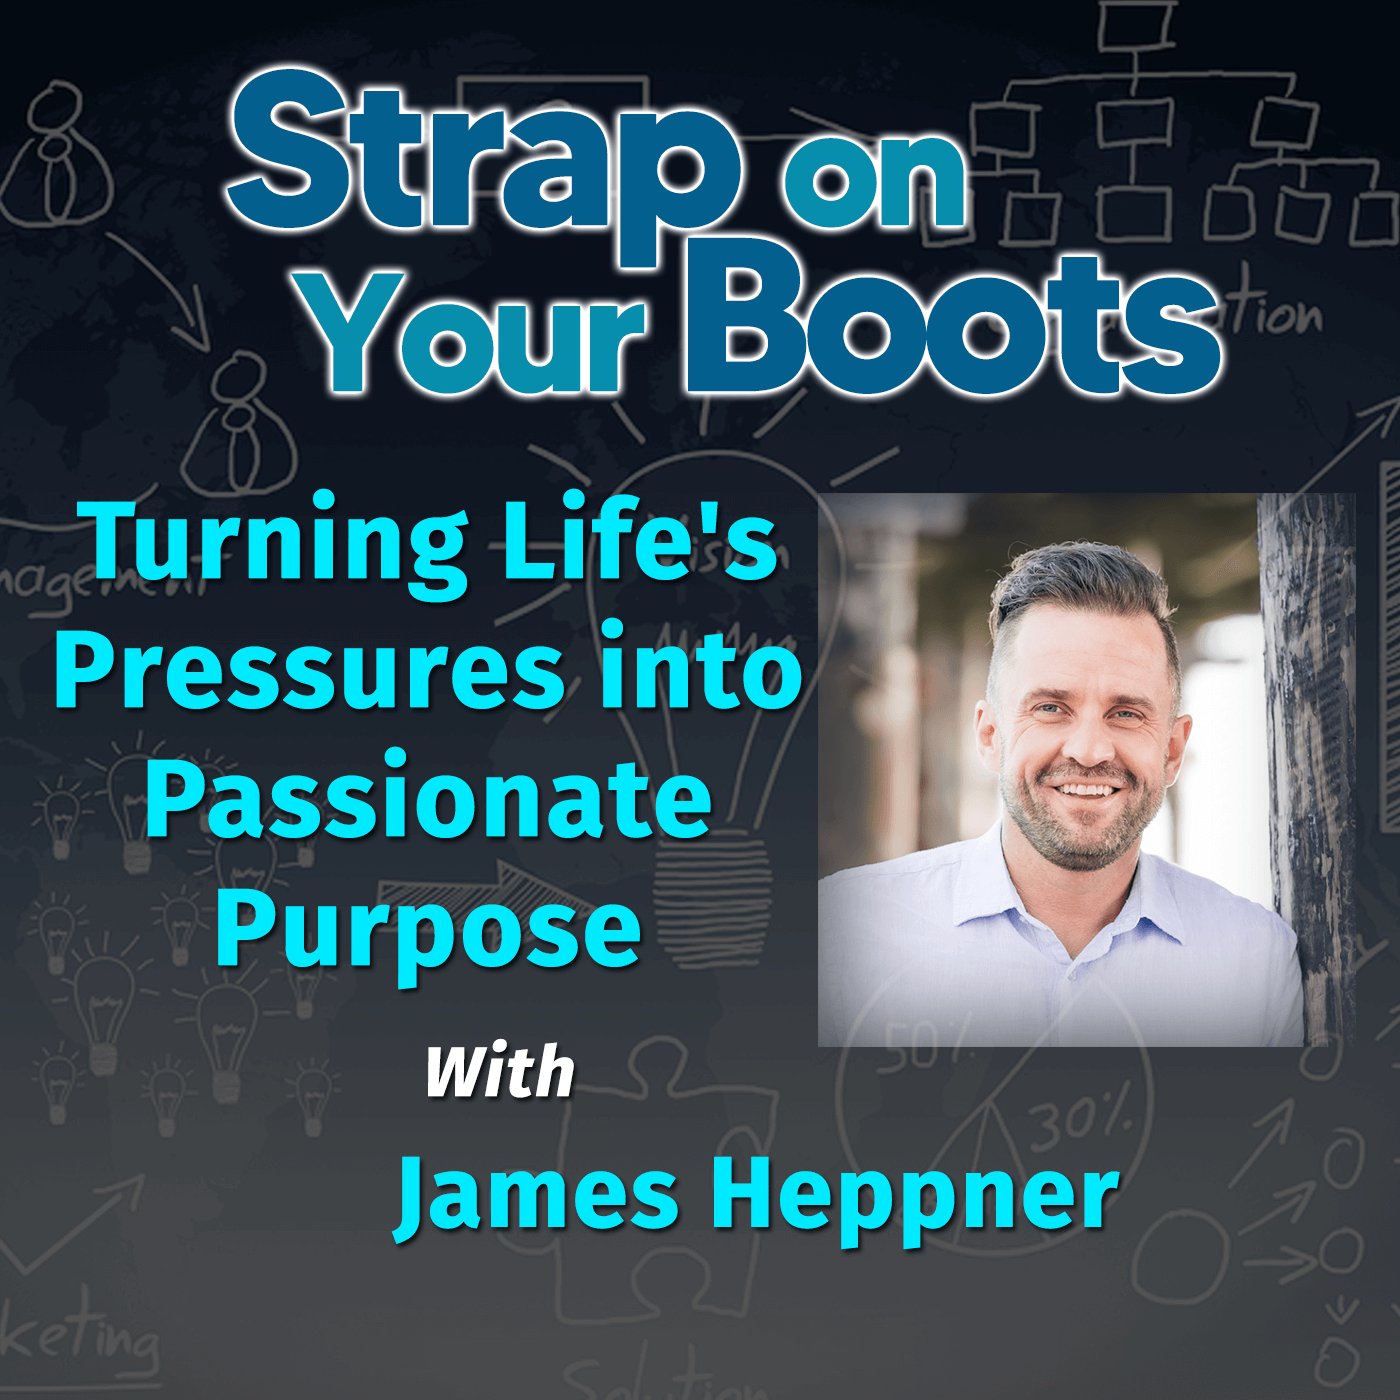 Turning Life’s Pressures into Passionate Purpose with James Heppner